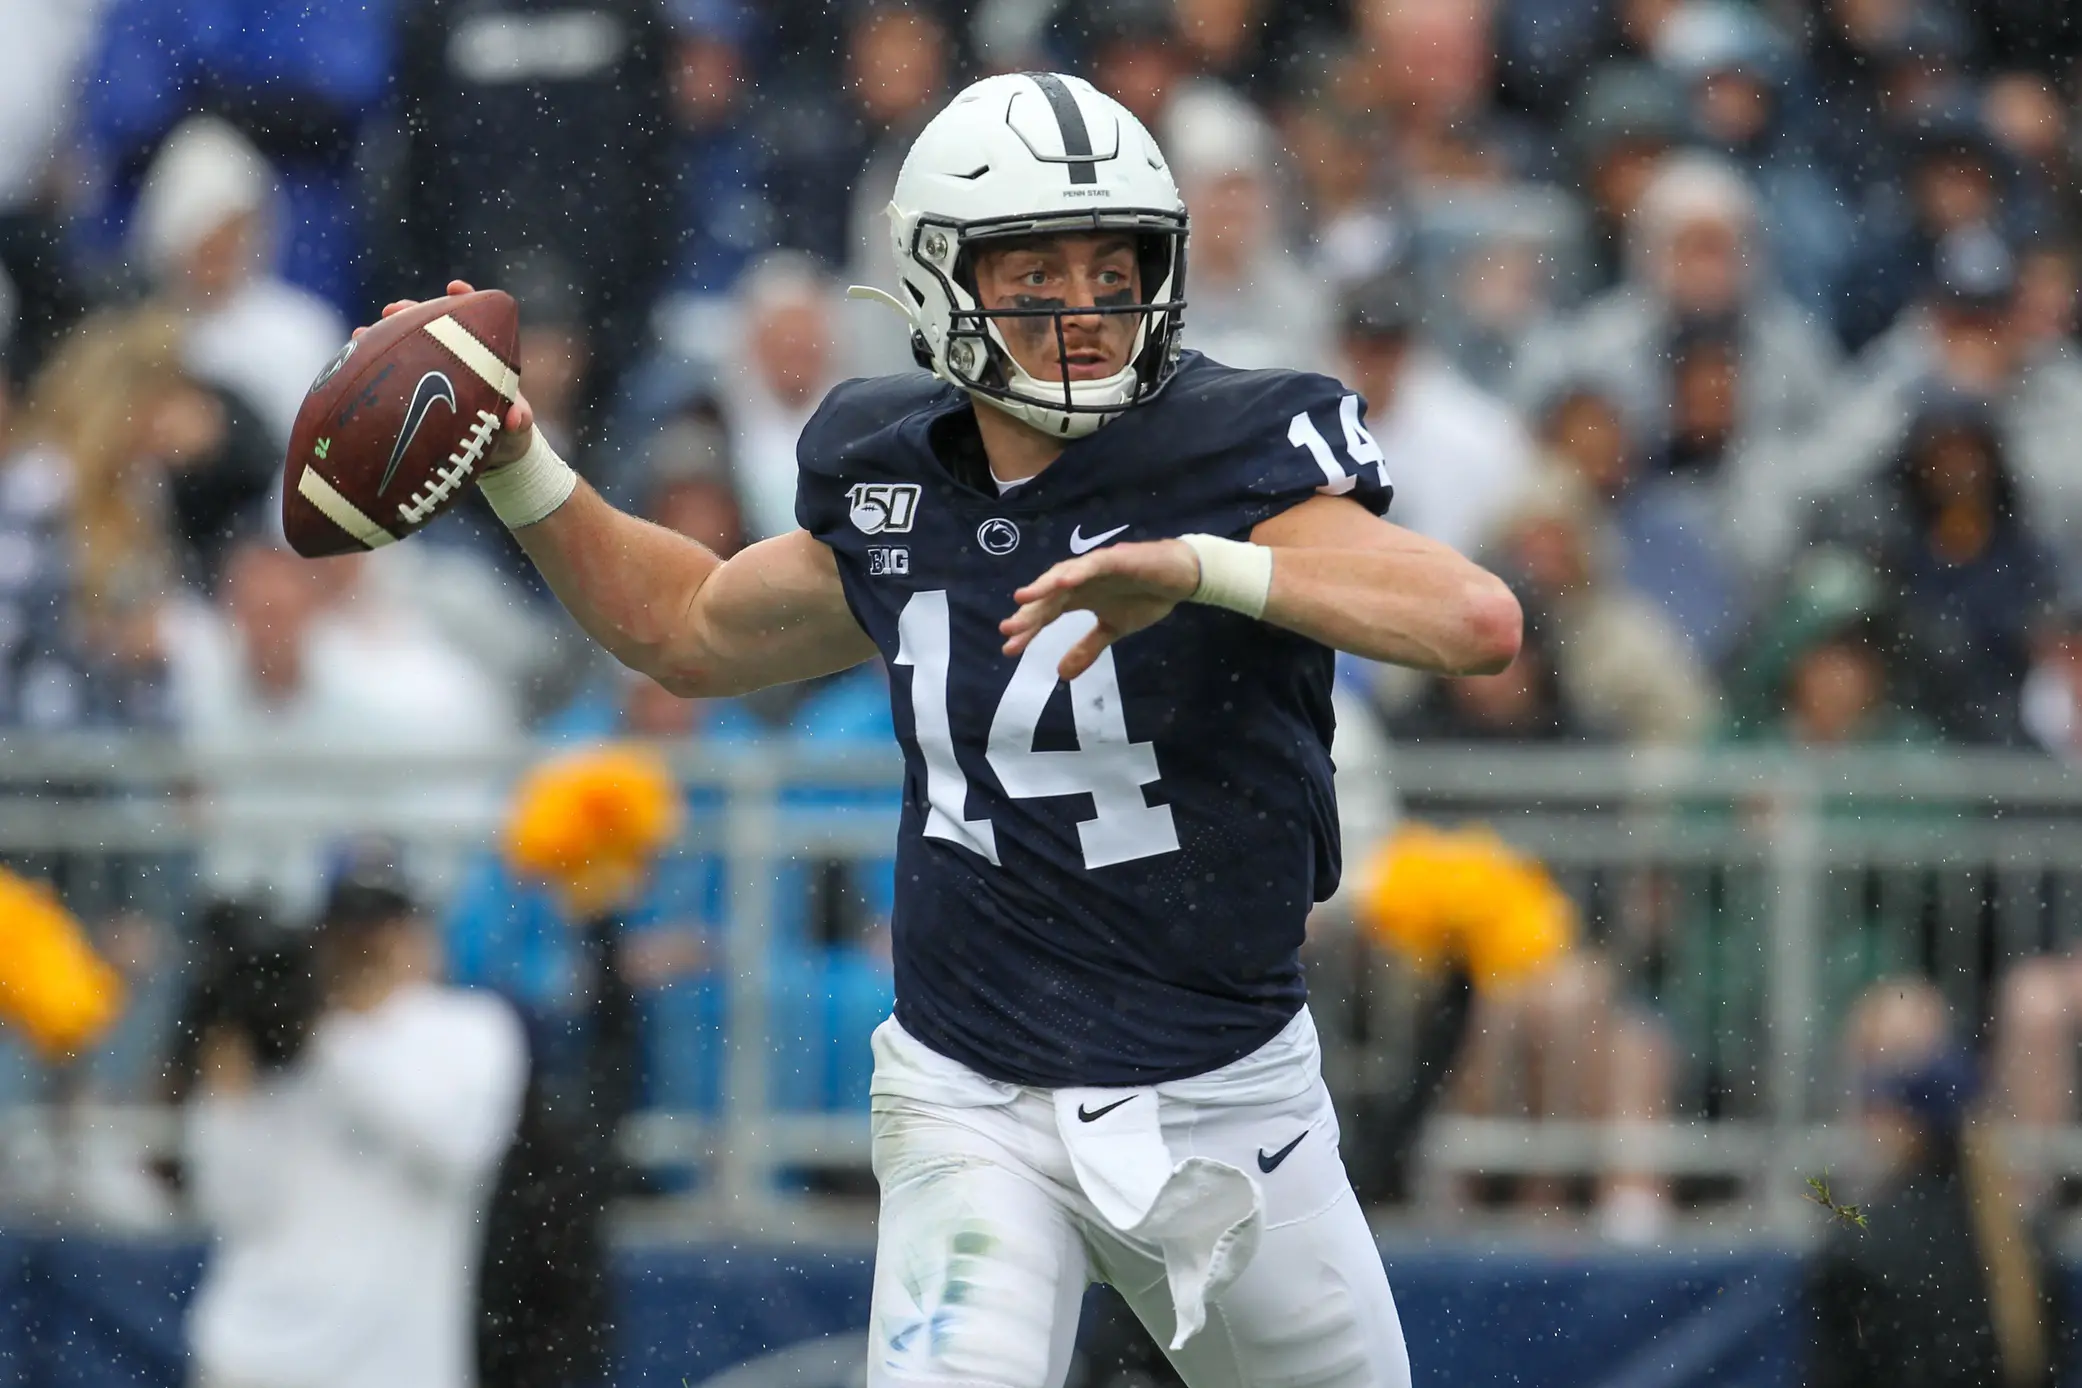 Penn State vs. Purdue Betting Preview: odds, picks, predictions